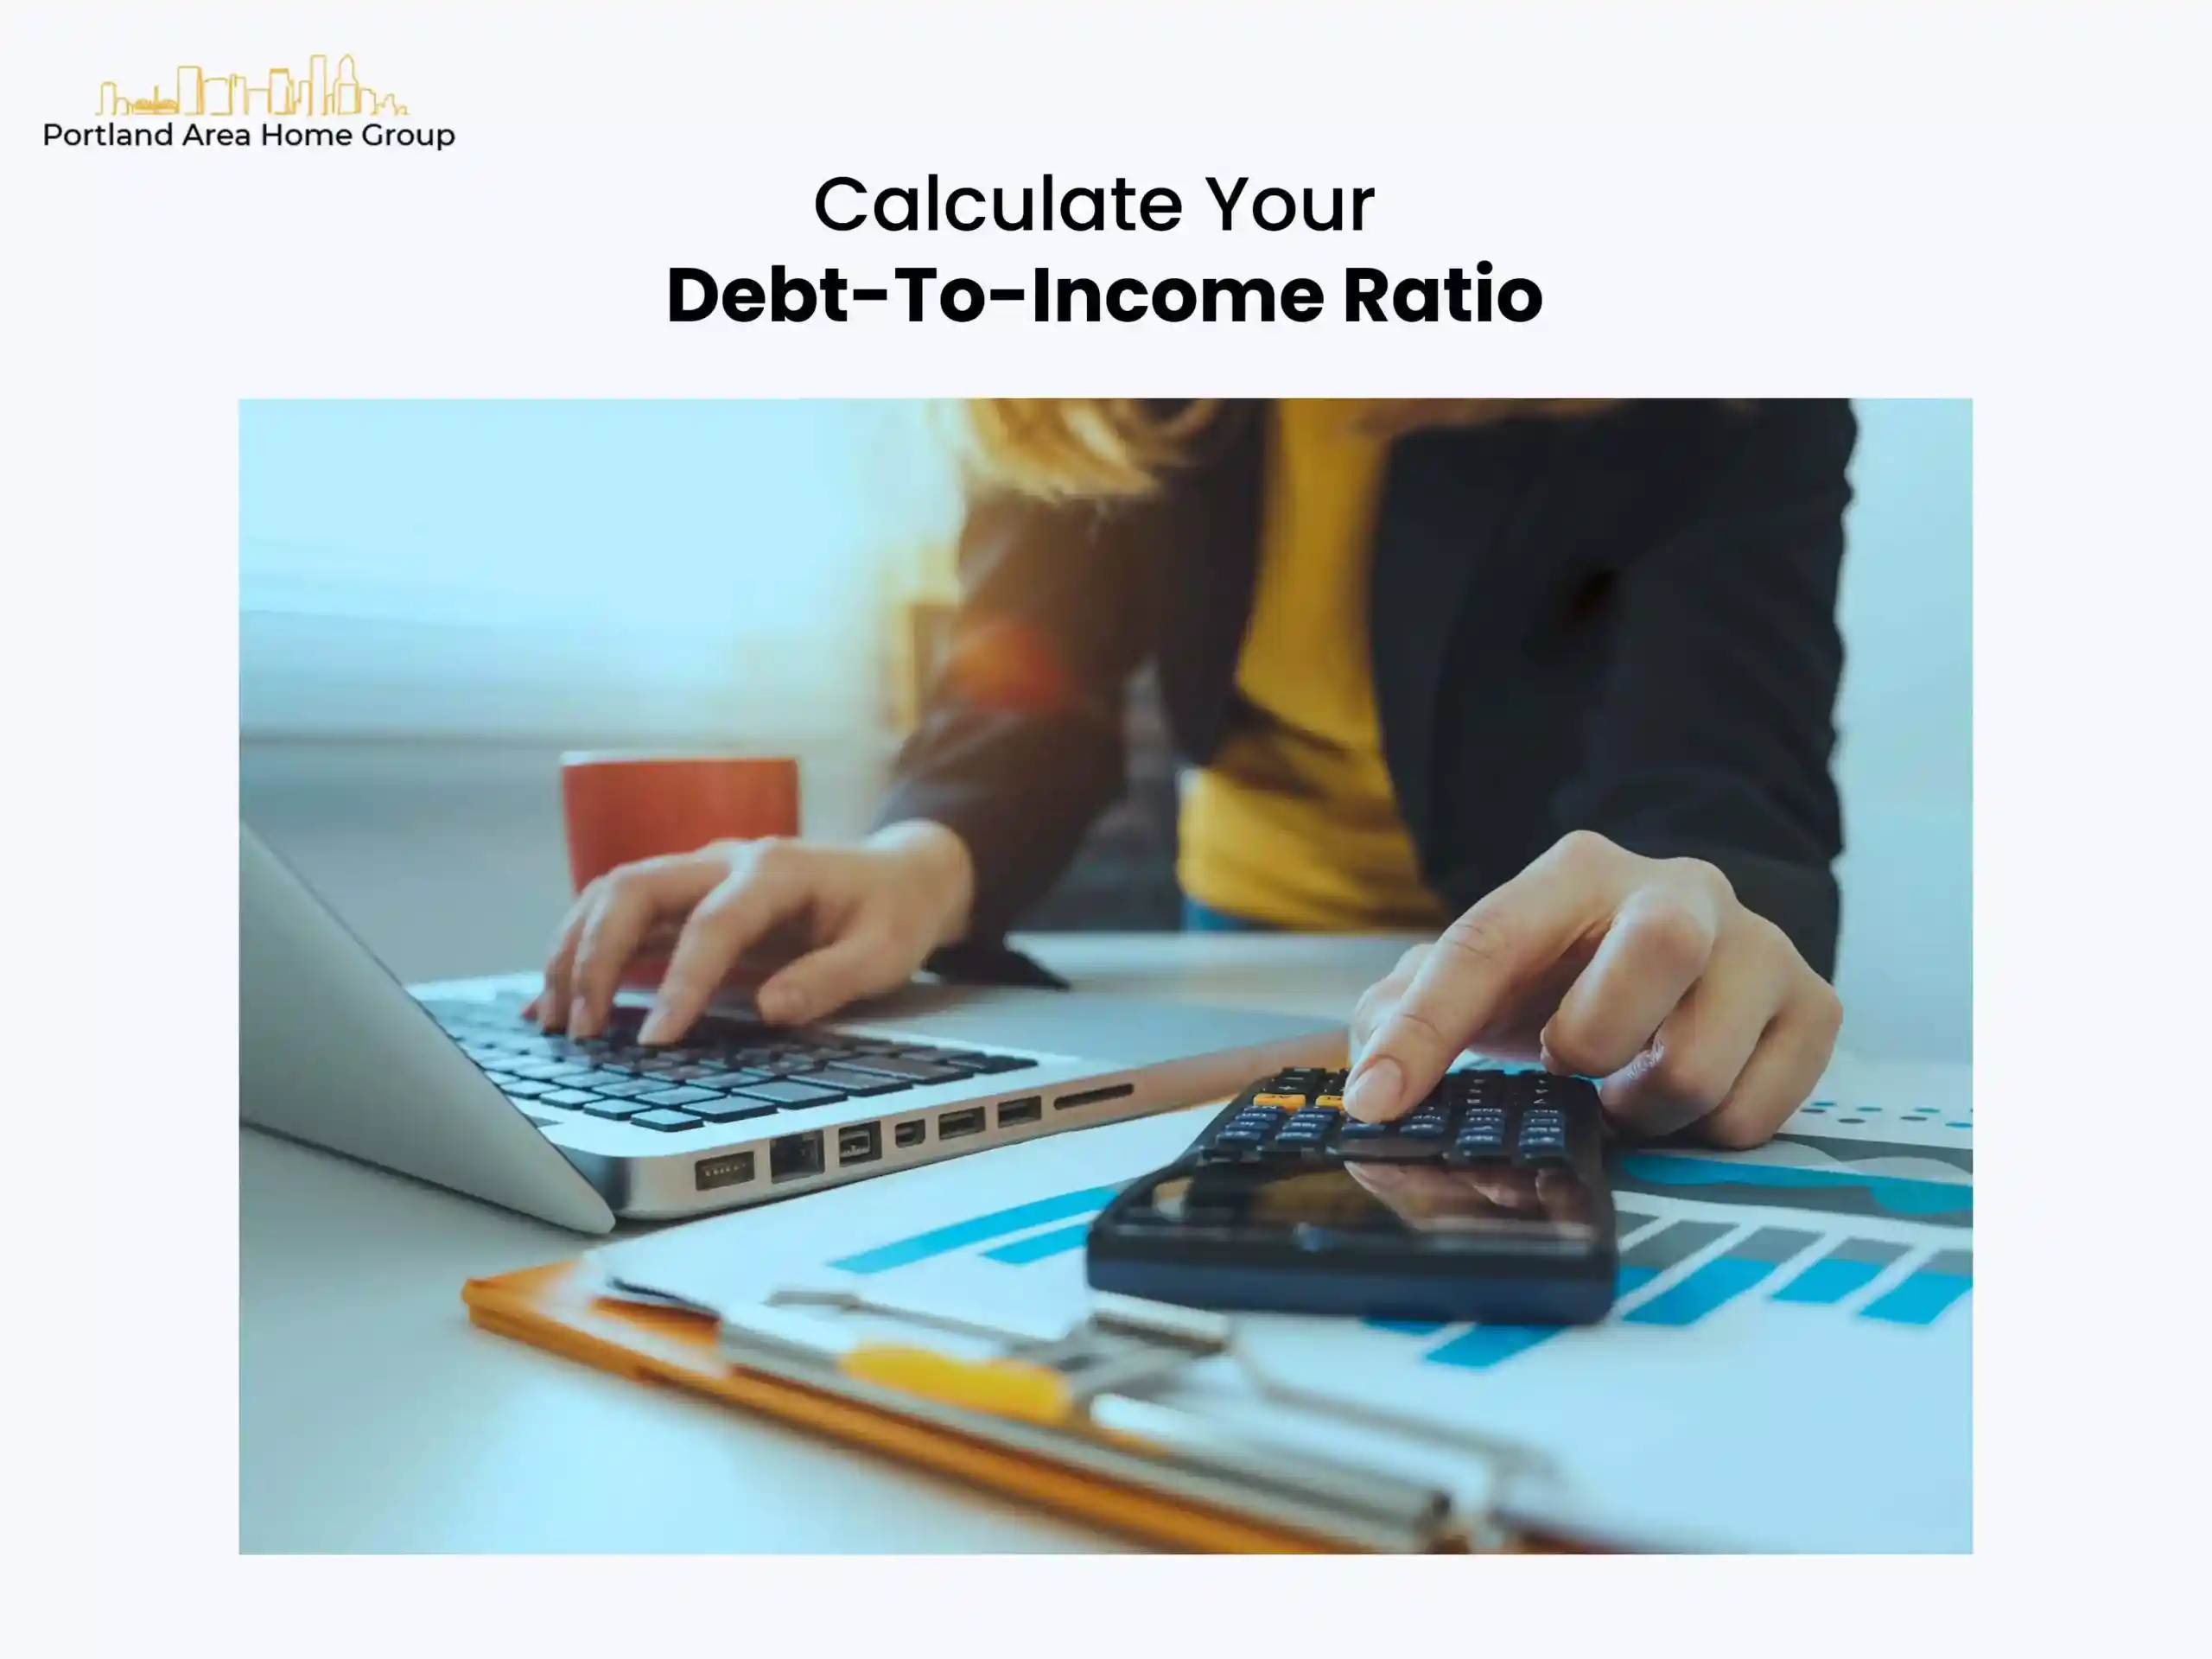 Calculate Your Debt-To-Income Ratio